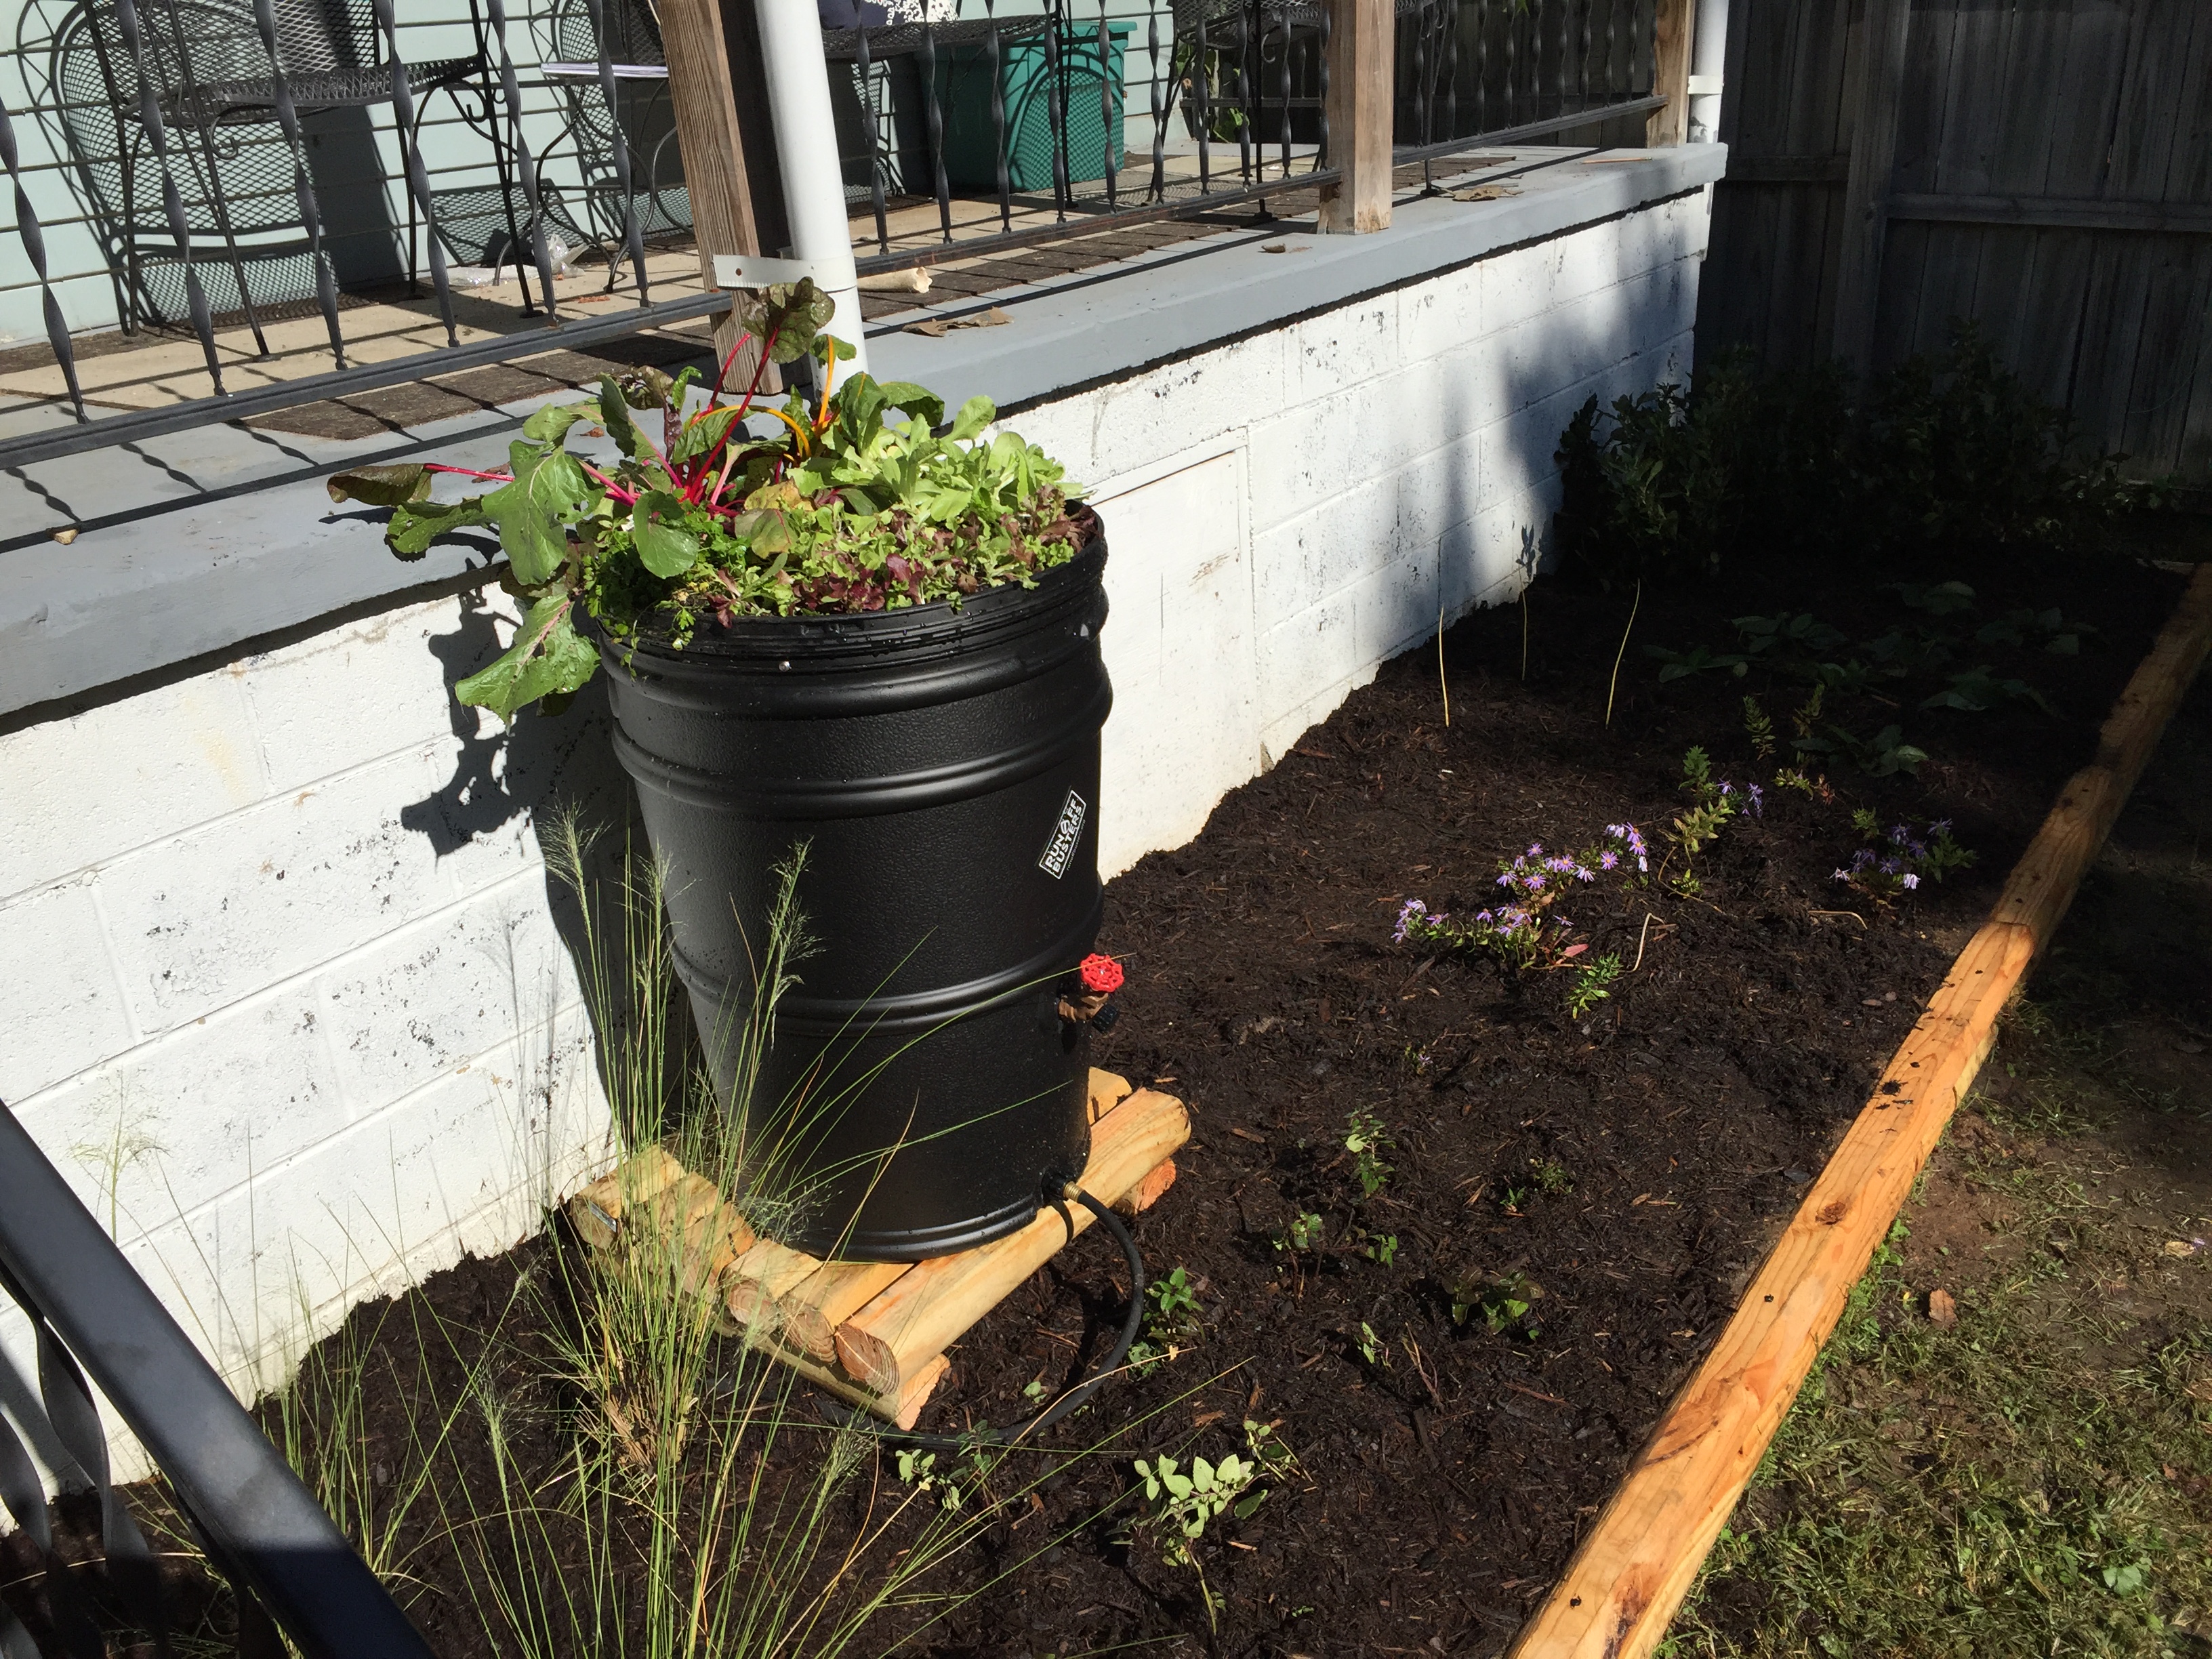 Double Duty: Consider combining a rainbarrel and an edible container